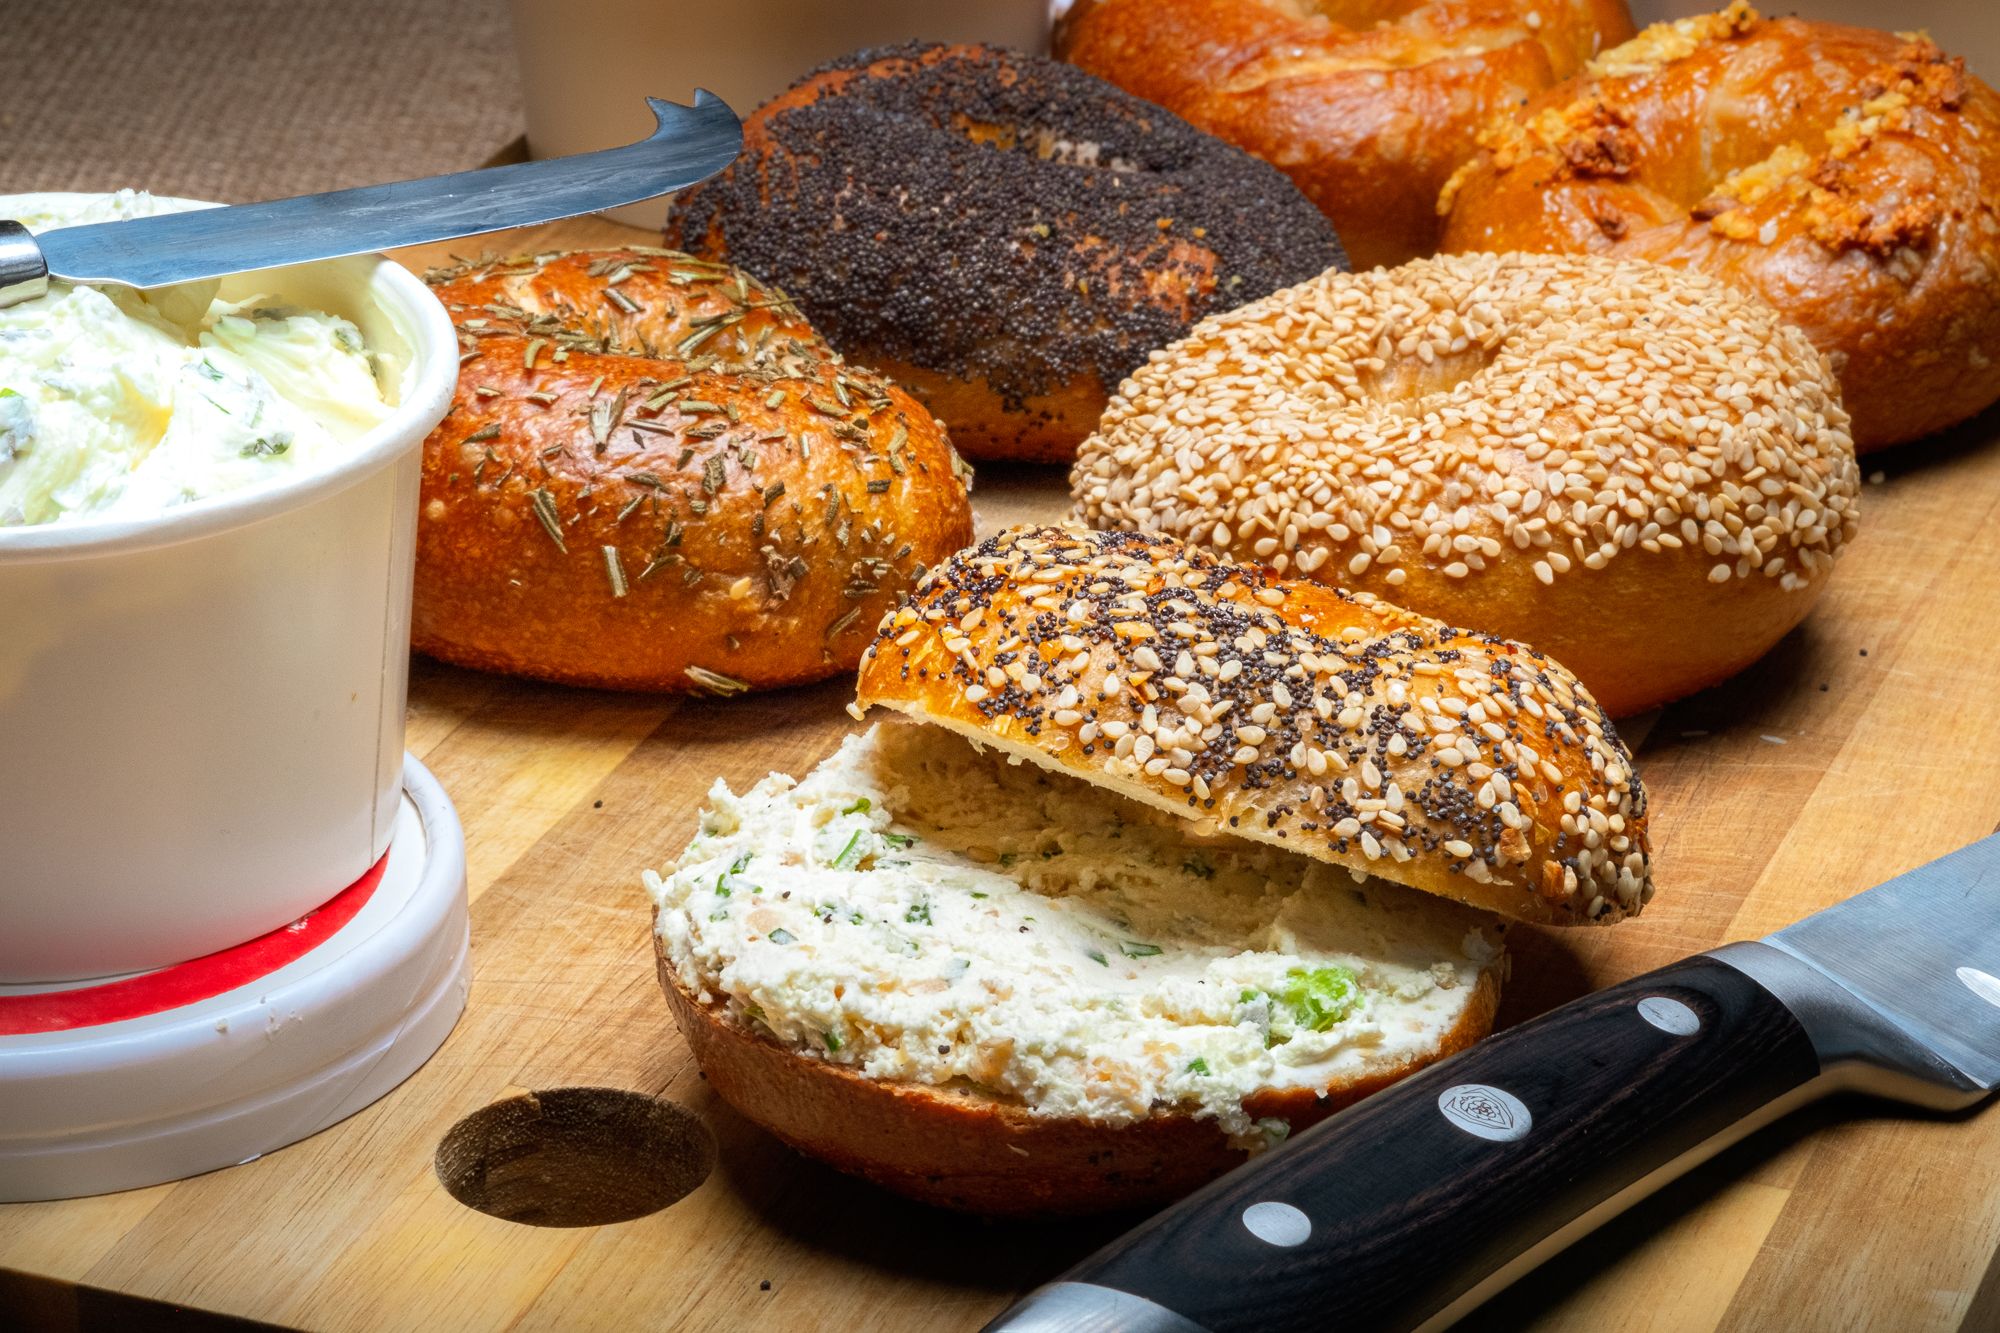 A selection of offerings from Rubinstein Bagels, including an everything variety smeared with cream cheese